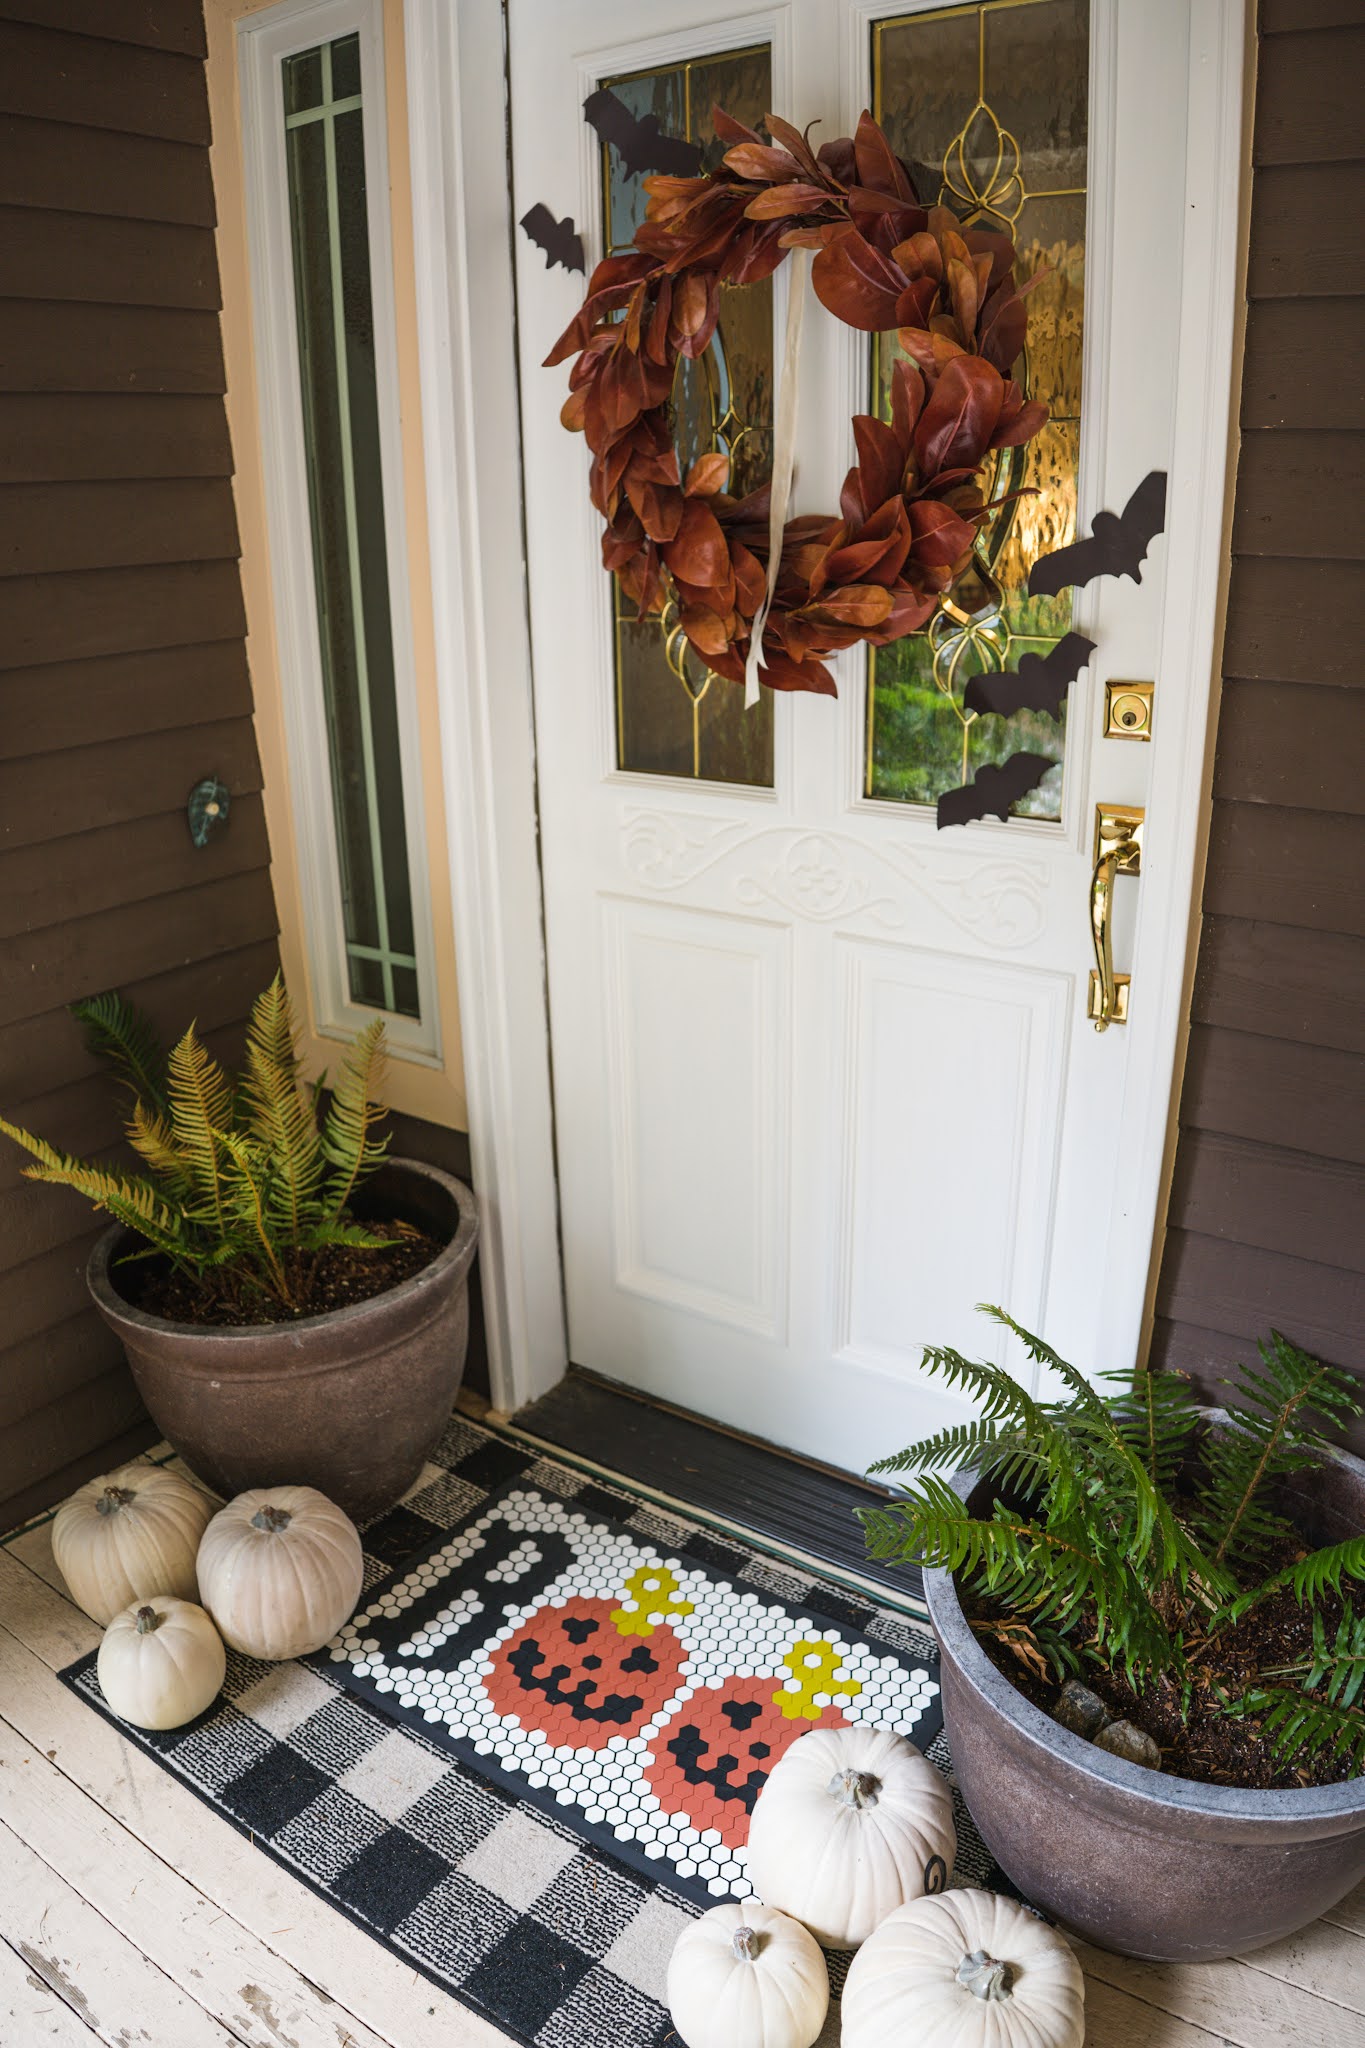 Domestic Fashionista: Our Whimsical And Slightly Spooky Fall Home Decor